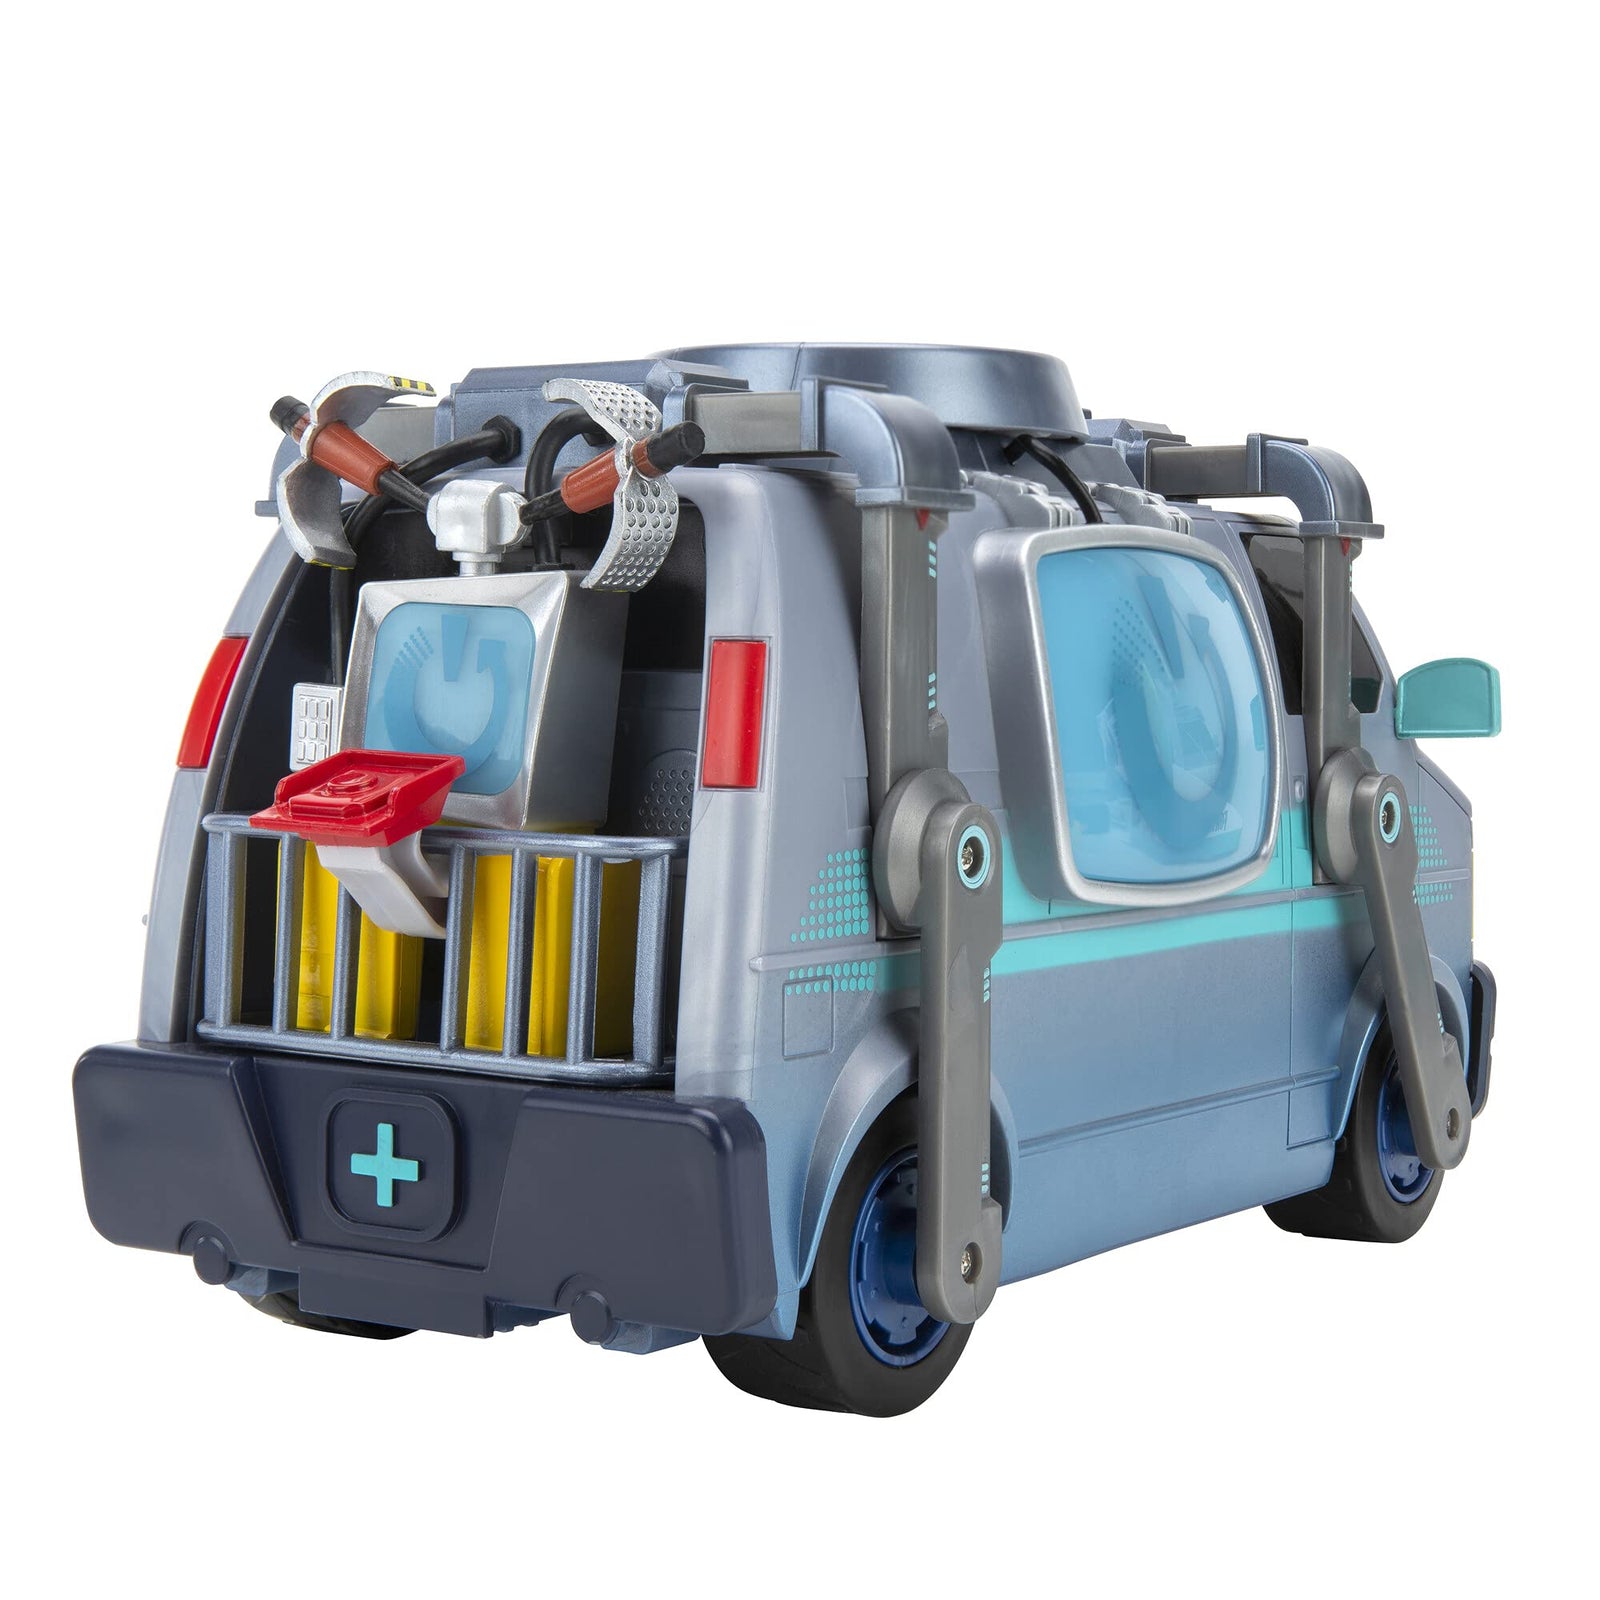 Fortnite Feature Deluxe Reboot Van Vehicle, Electronic Vehicle with Two 4-inch Articulated Reboot Drift (Stage 1) and Reboot Recruit Jonesy Figures, and Accessory - Amazon Exclusive